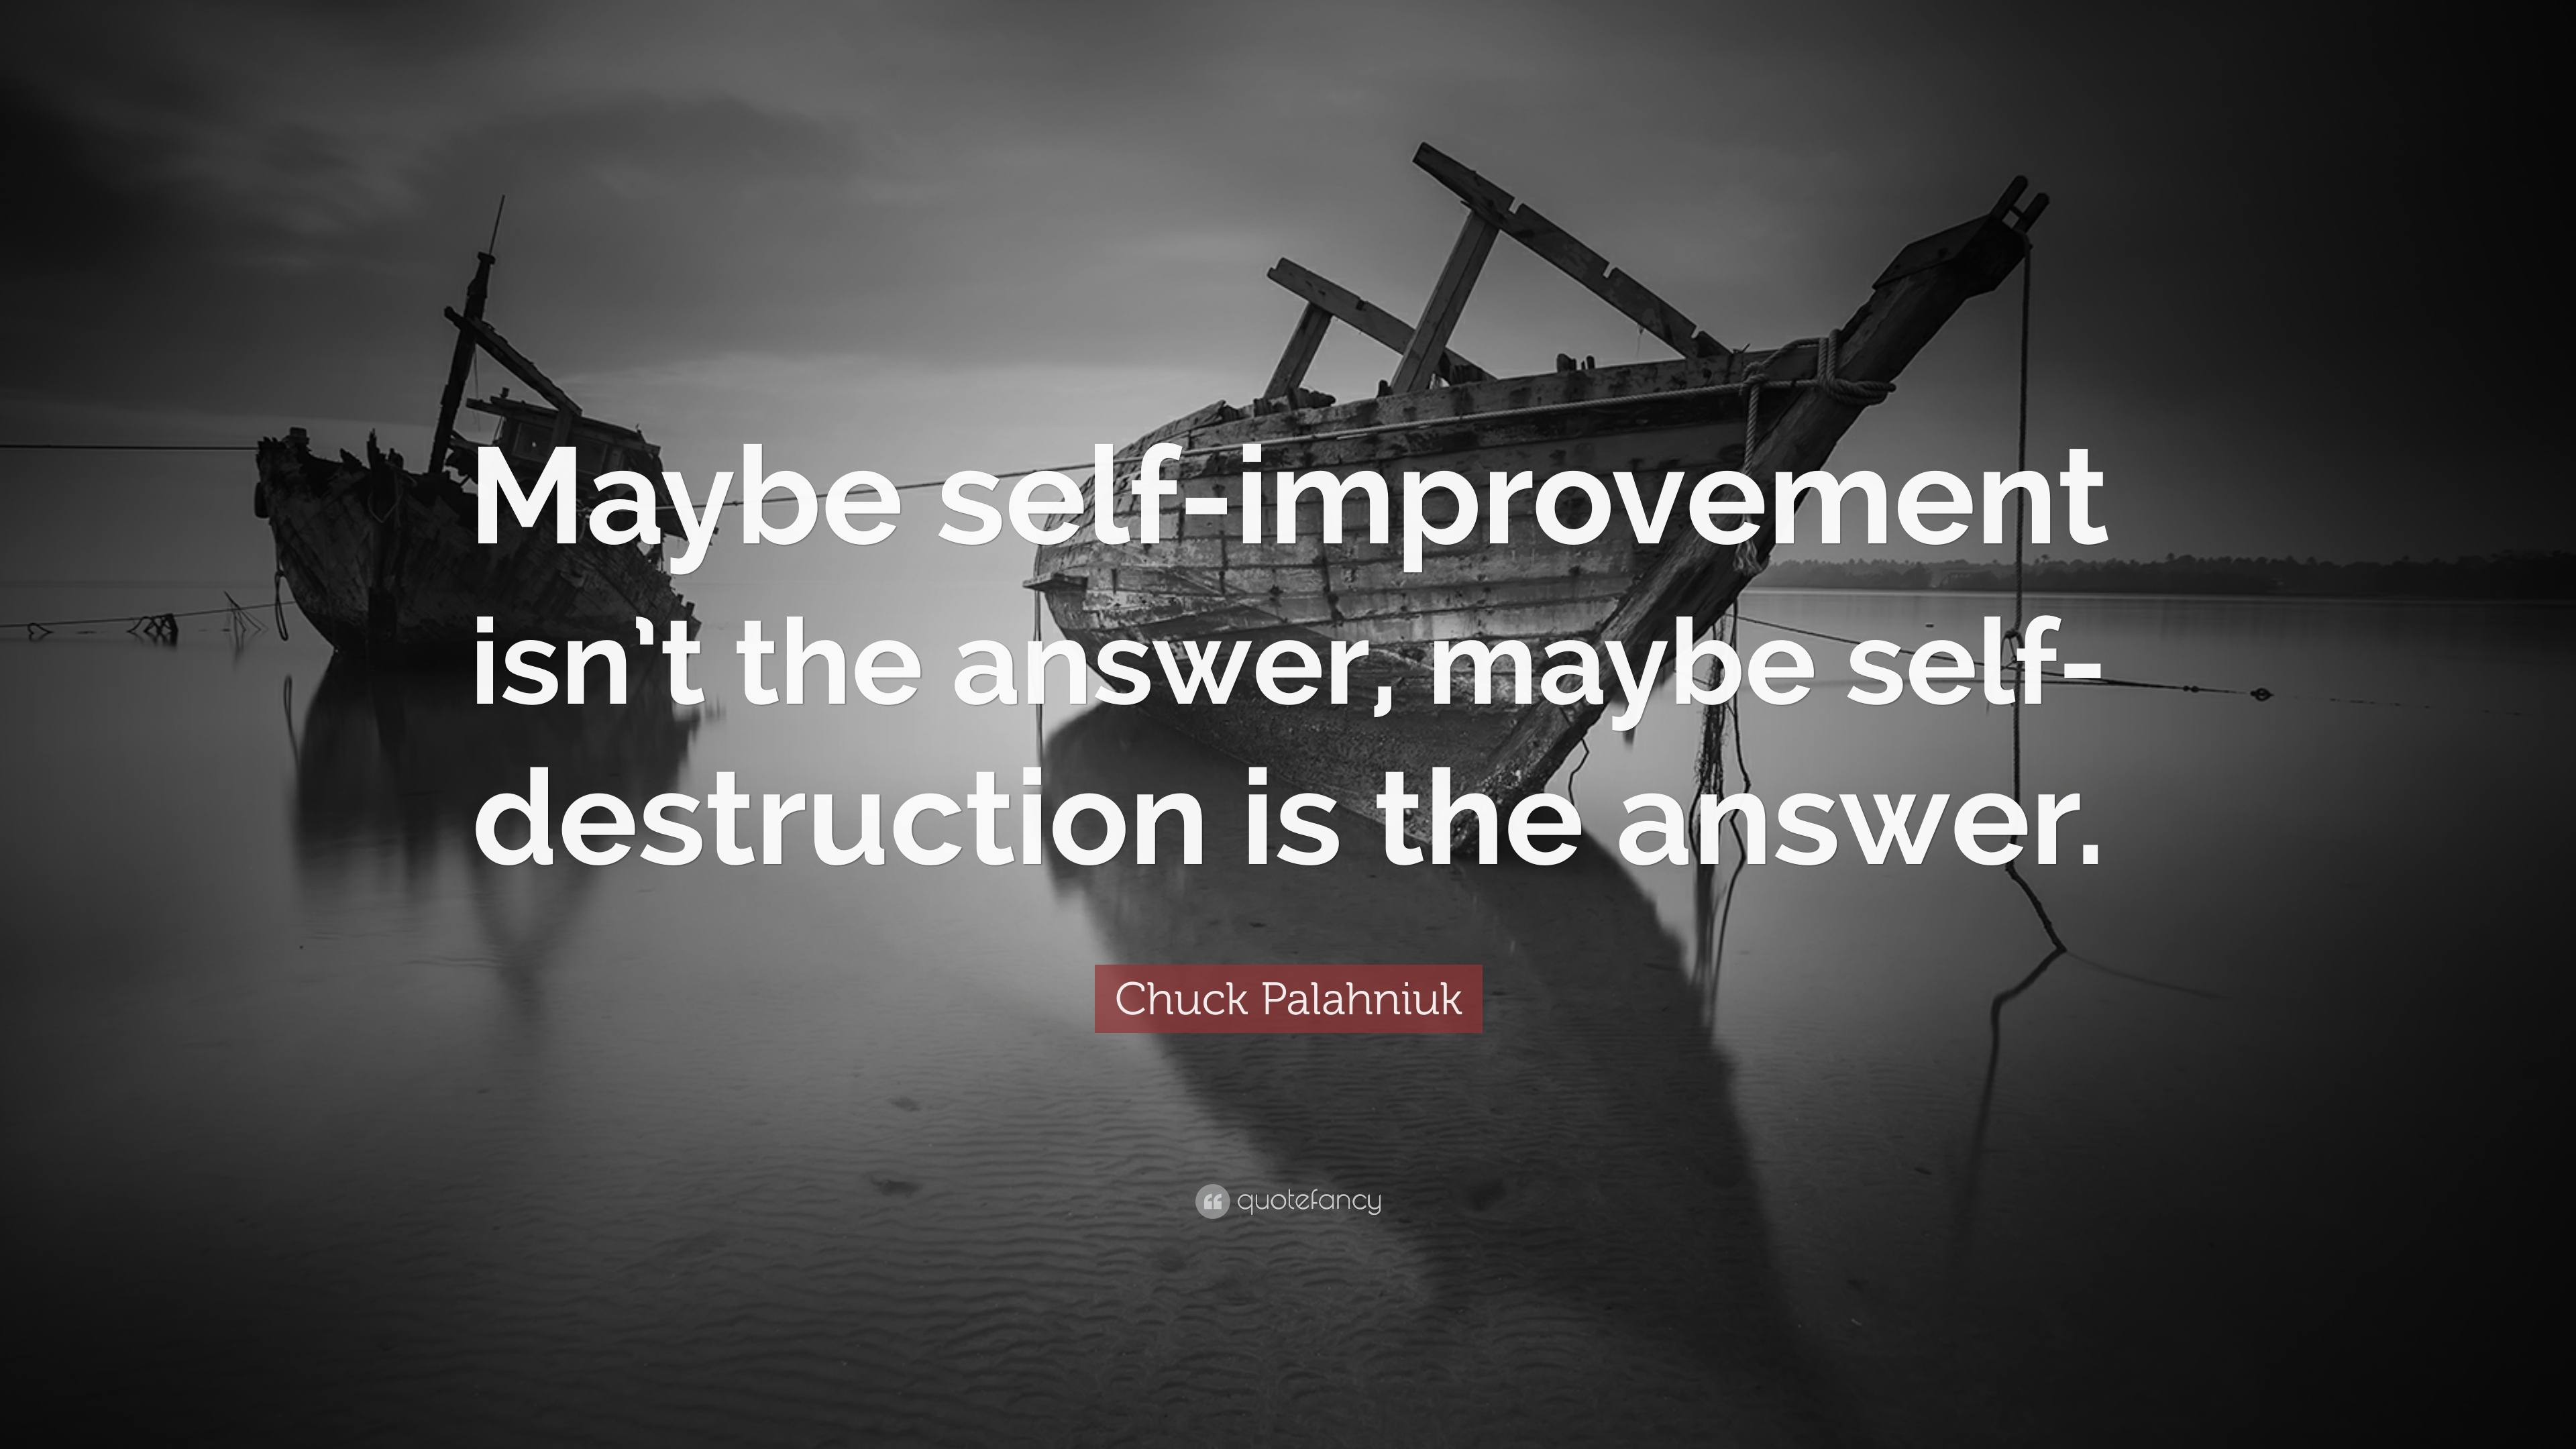 Chuck Palahniuk Quote: “Maybe Self Improvement Isn't The Answer, Maybe Self Destruction Is The Answer.”